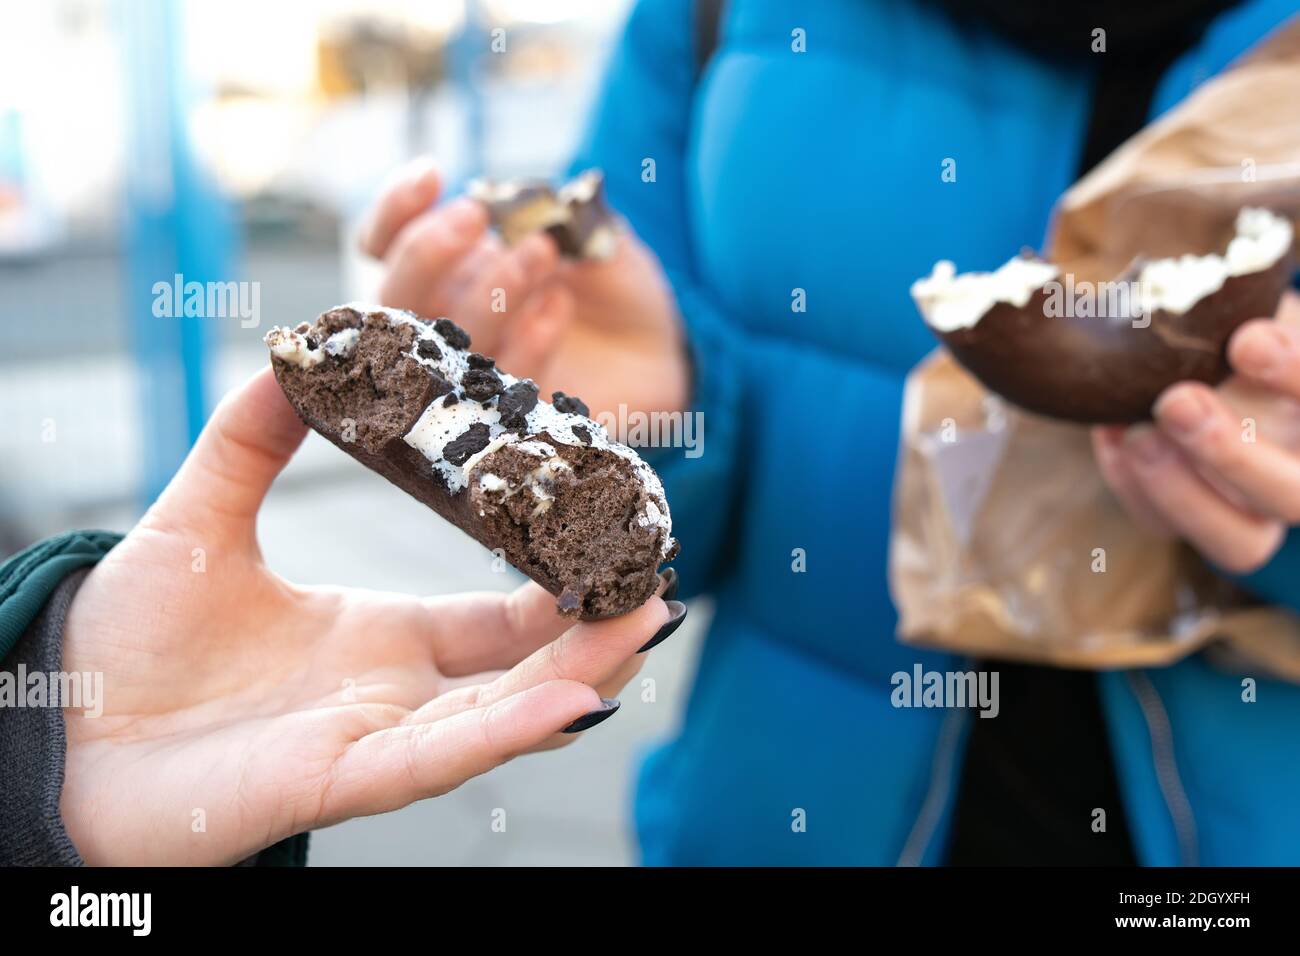 Female hands with tasty choco doughnut in the real life Stock Photo